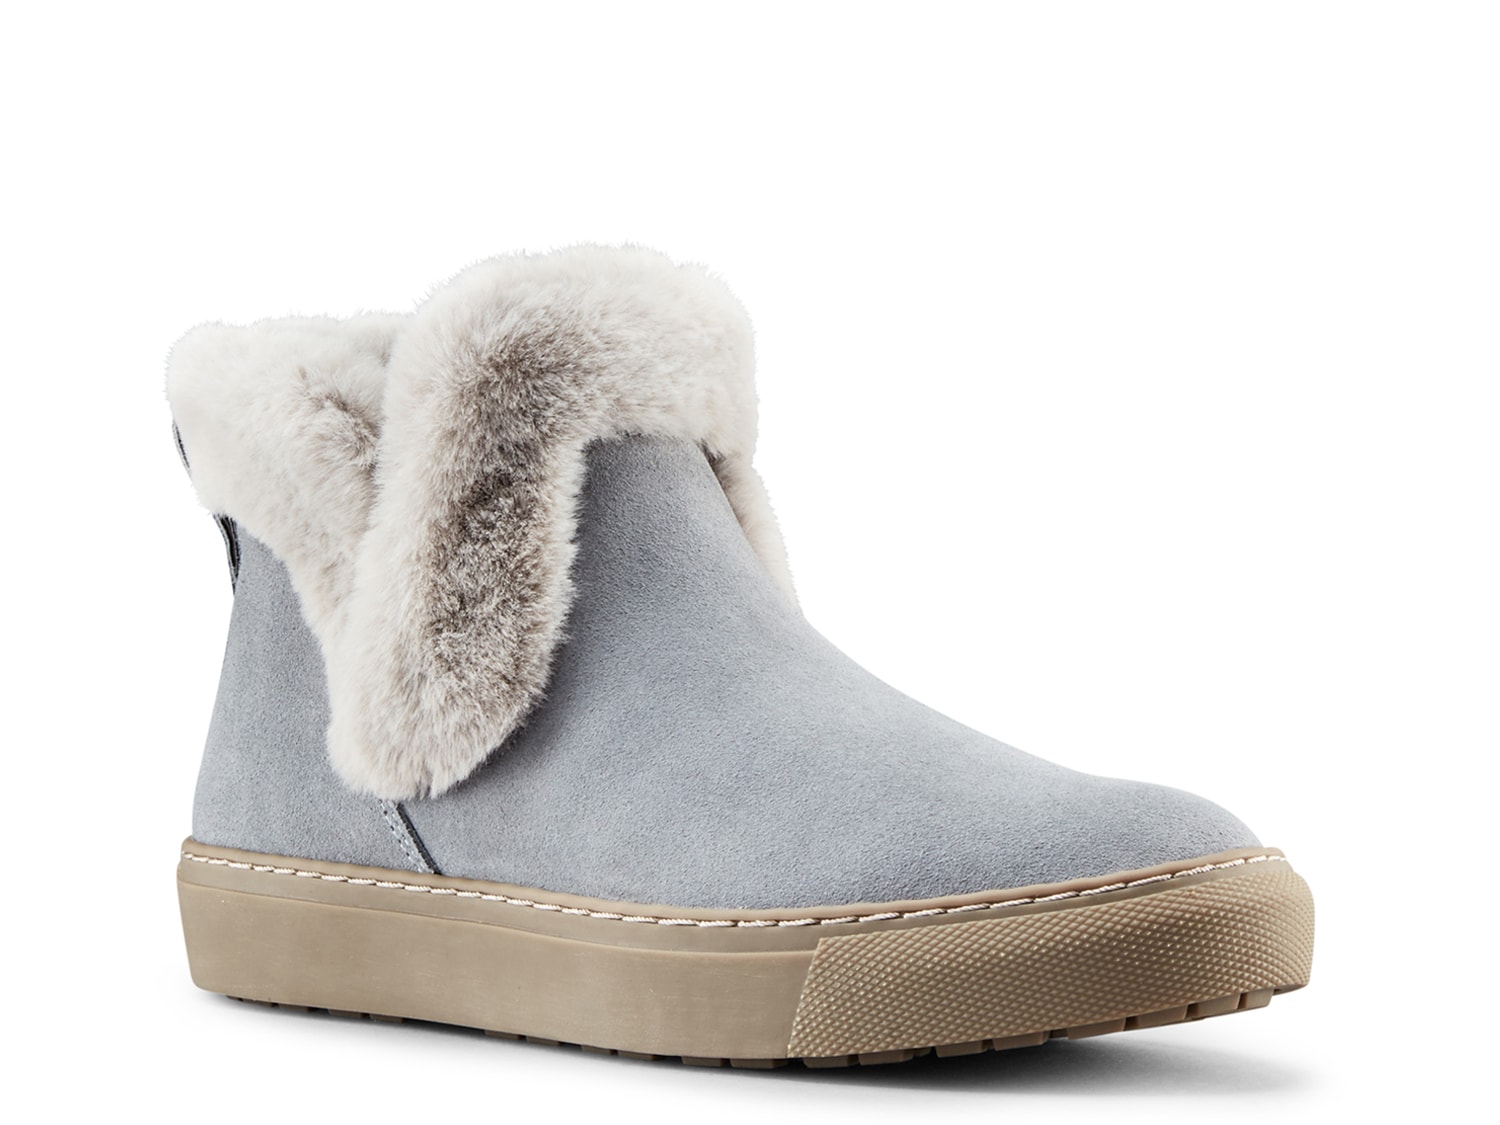 Cougar Duffy Bootie Shipping | DSW